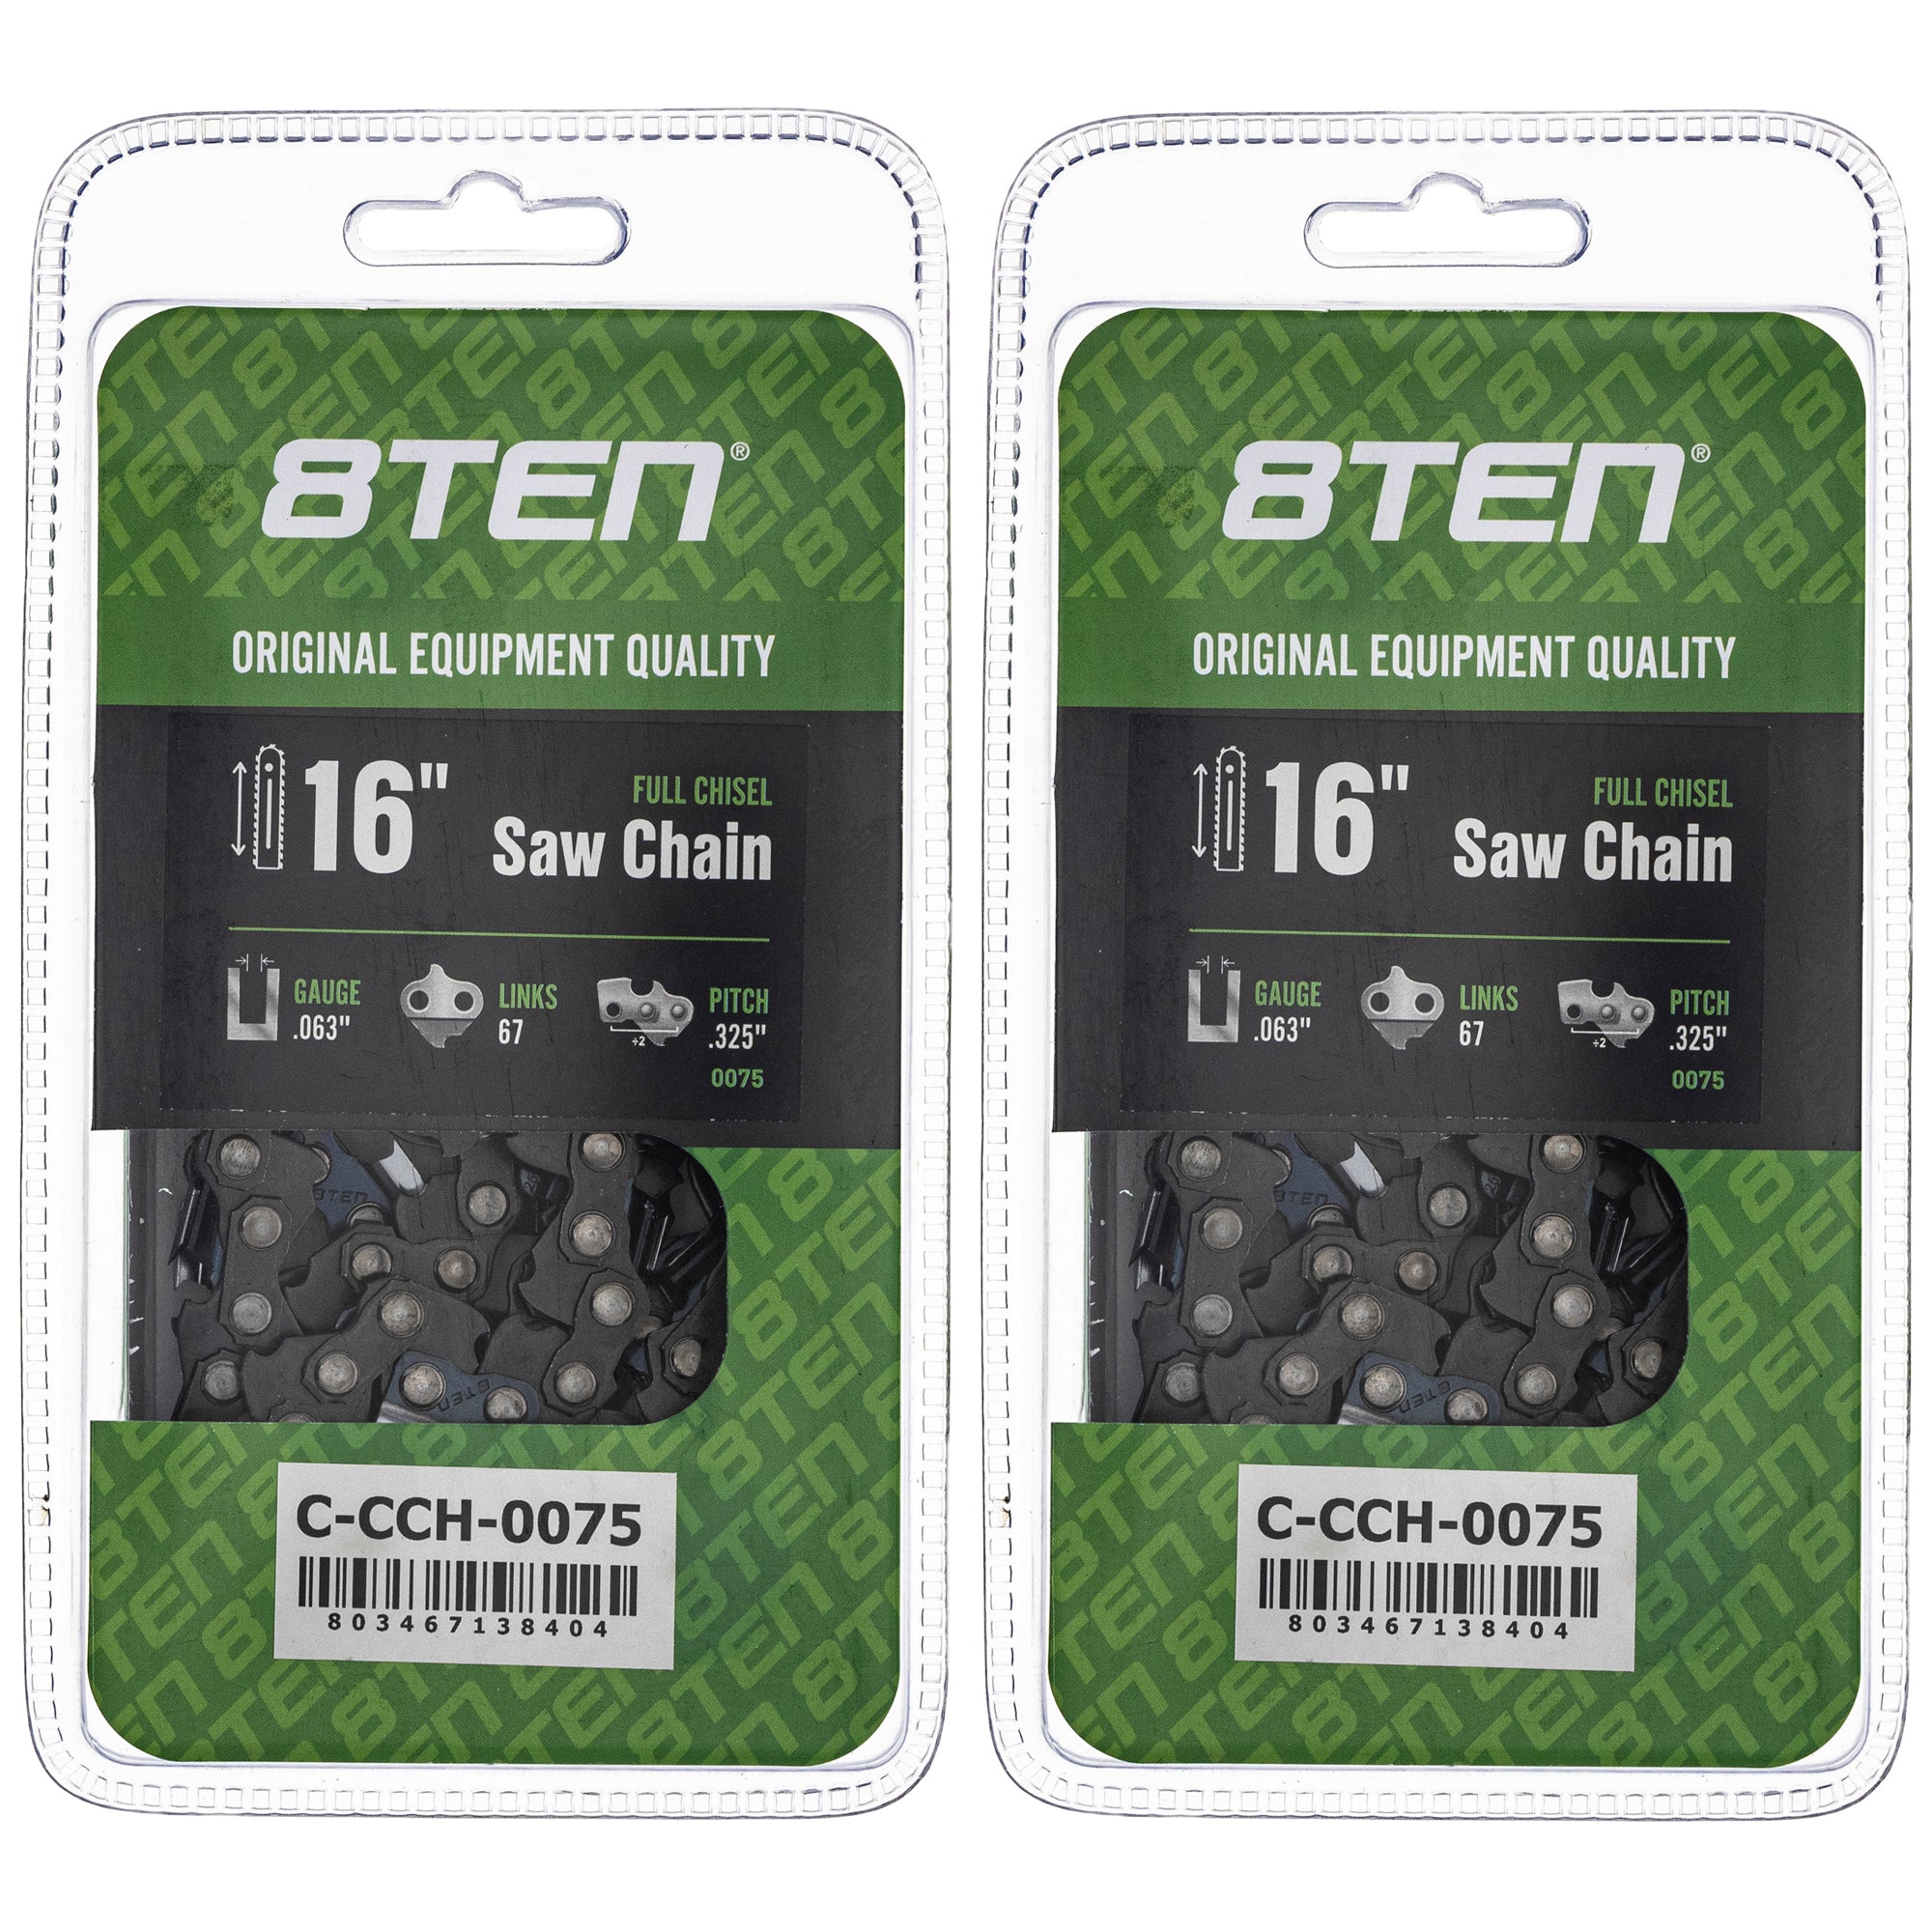 Chainsaw Chain 16 Inch .063 .325 67DL 2-Pack for zOTHER Oregon MS 634 30 040 8TEN 810-CCC2297H